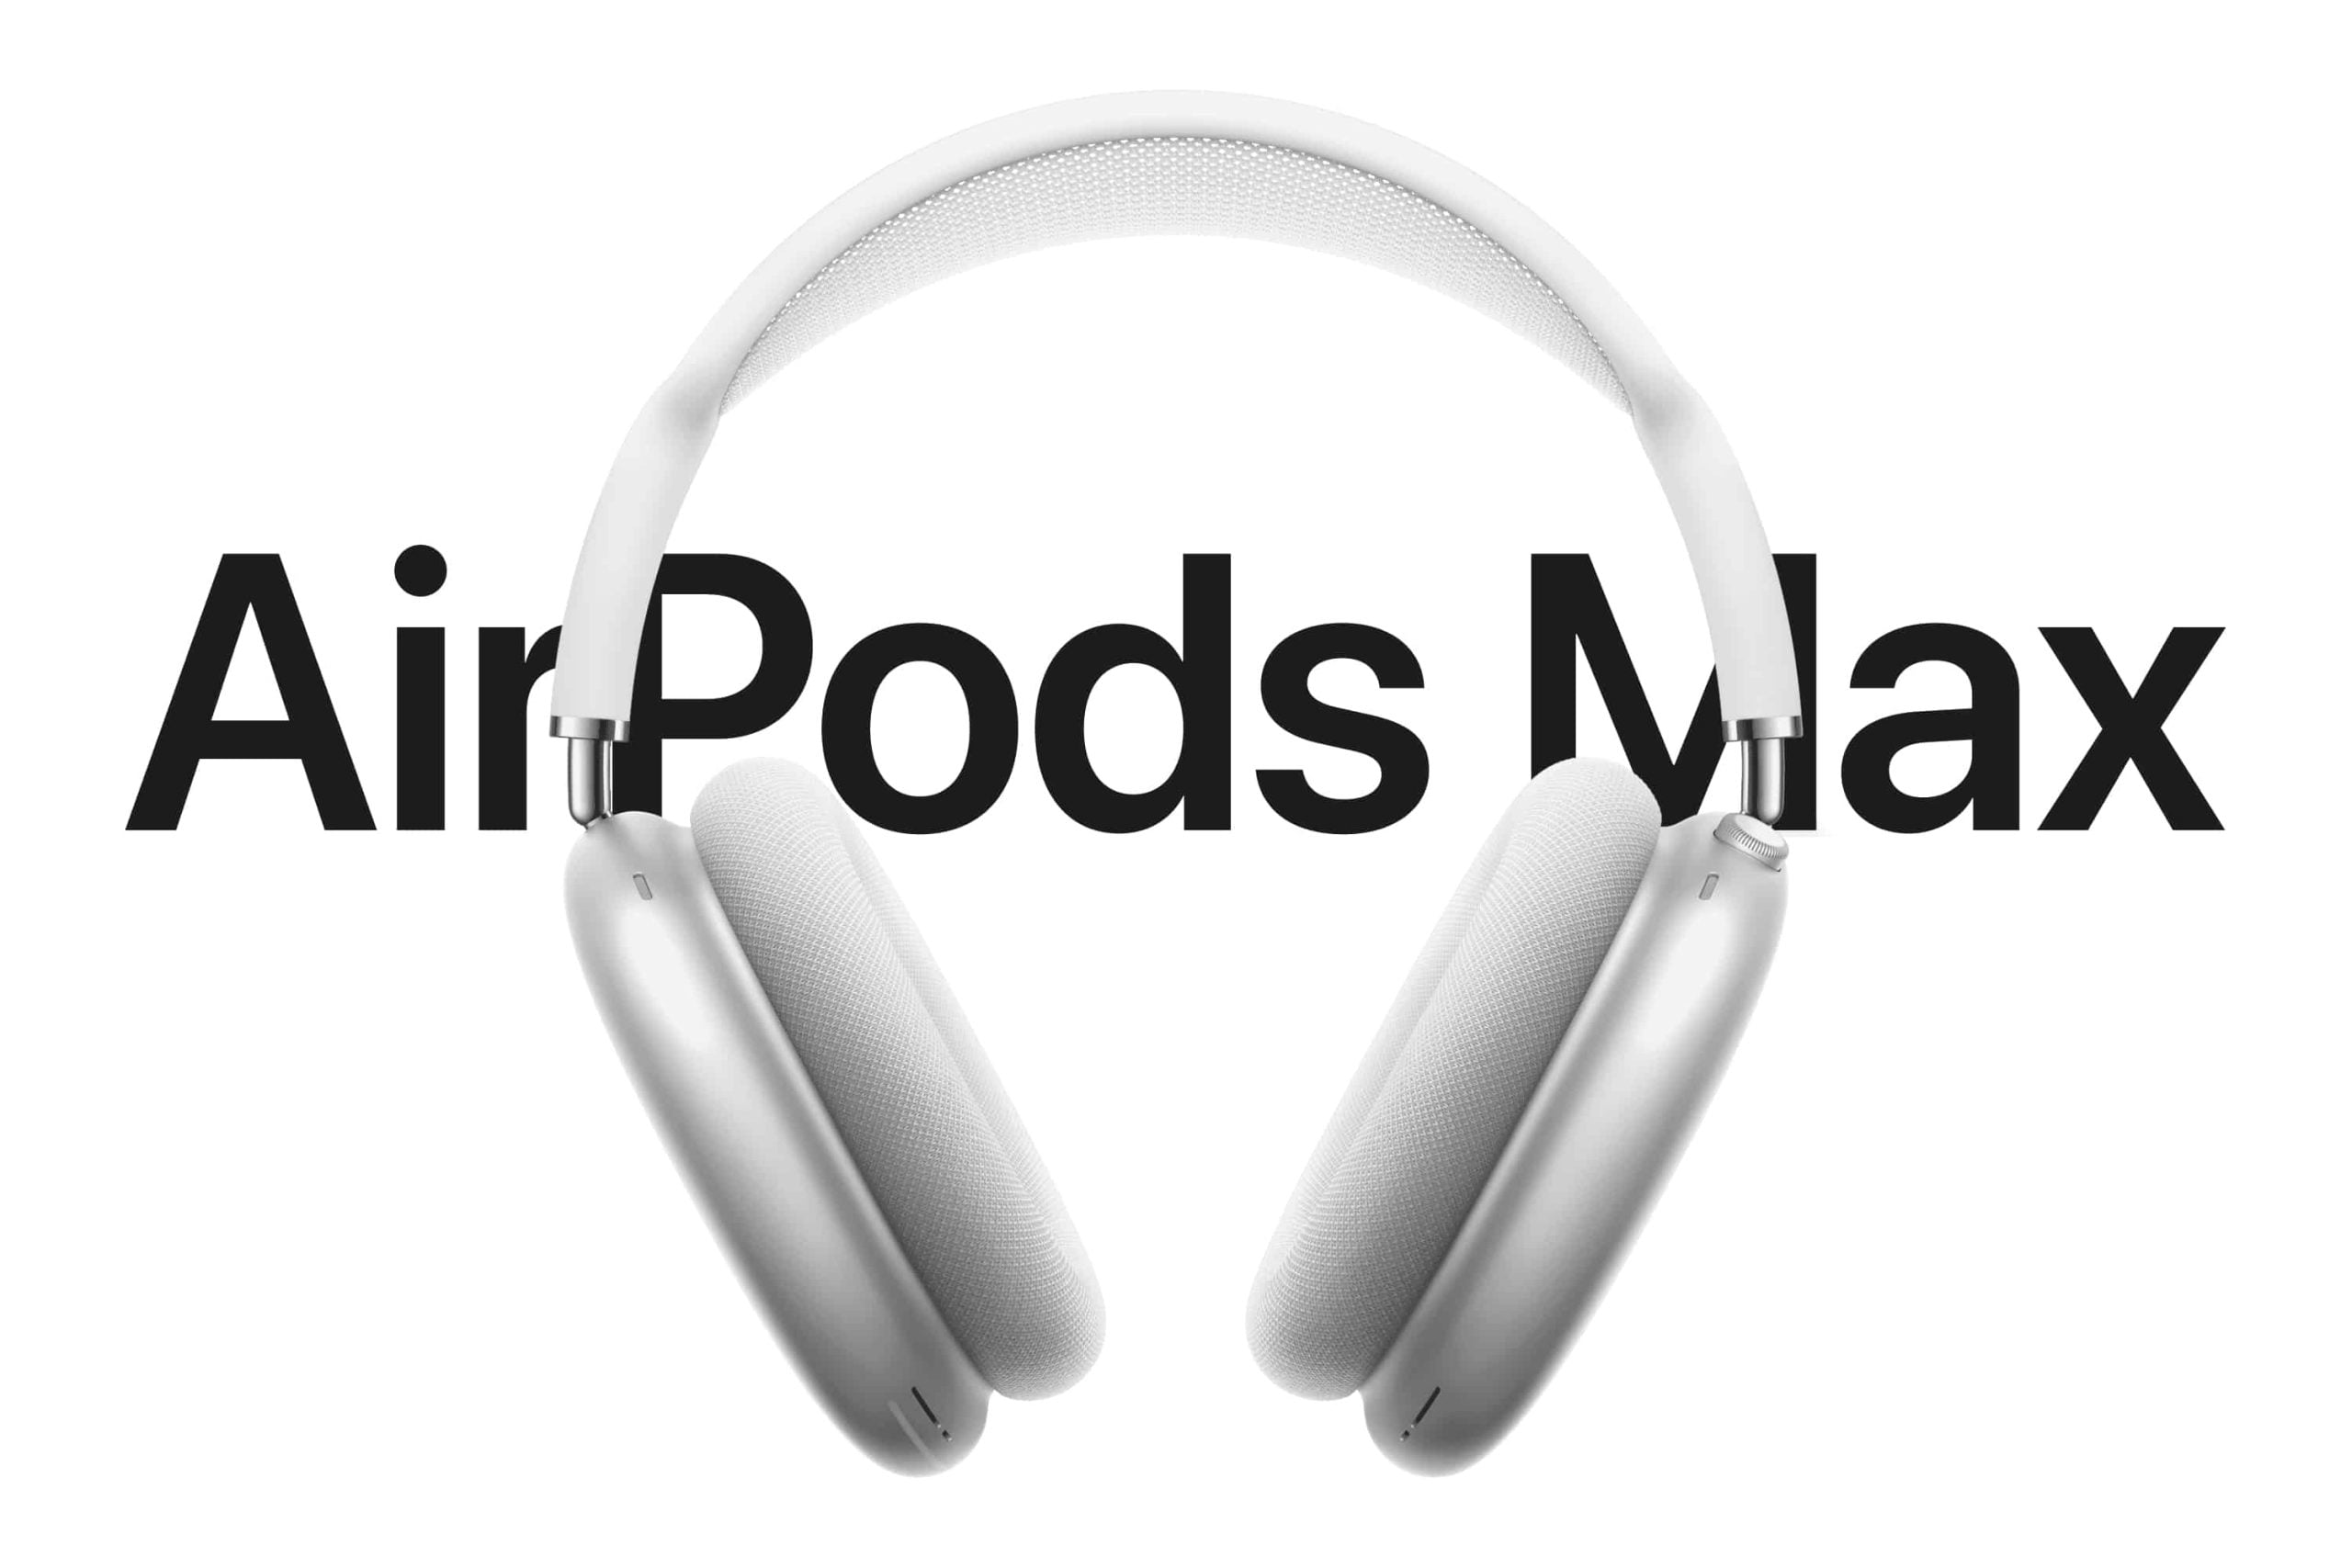 Apple introduces new over-ear AirPods Max